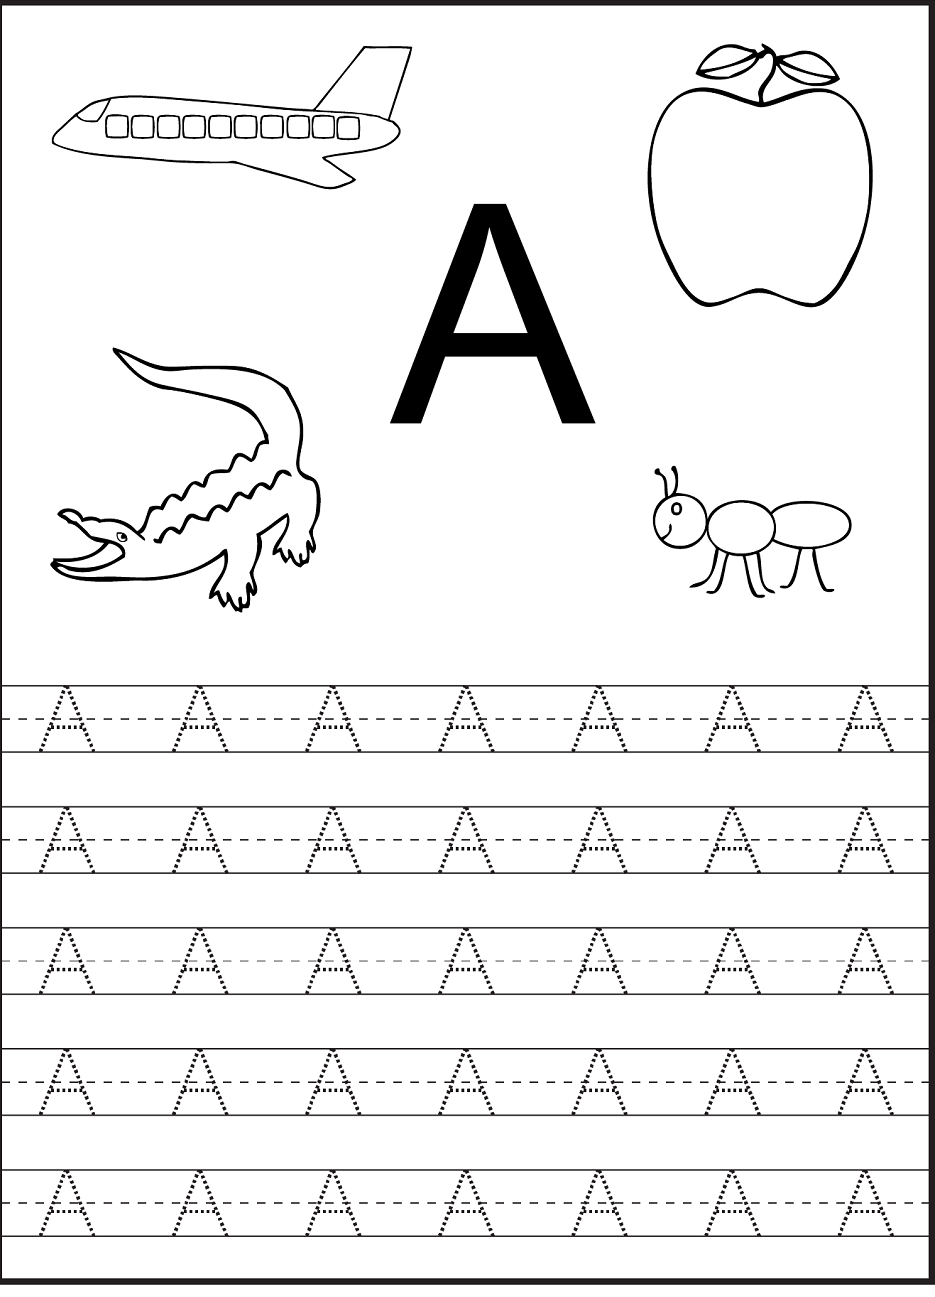 Free Printable Worksheets For The Letter A